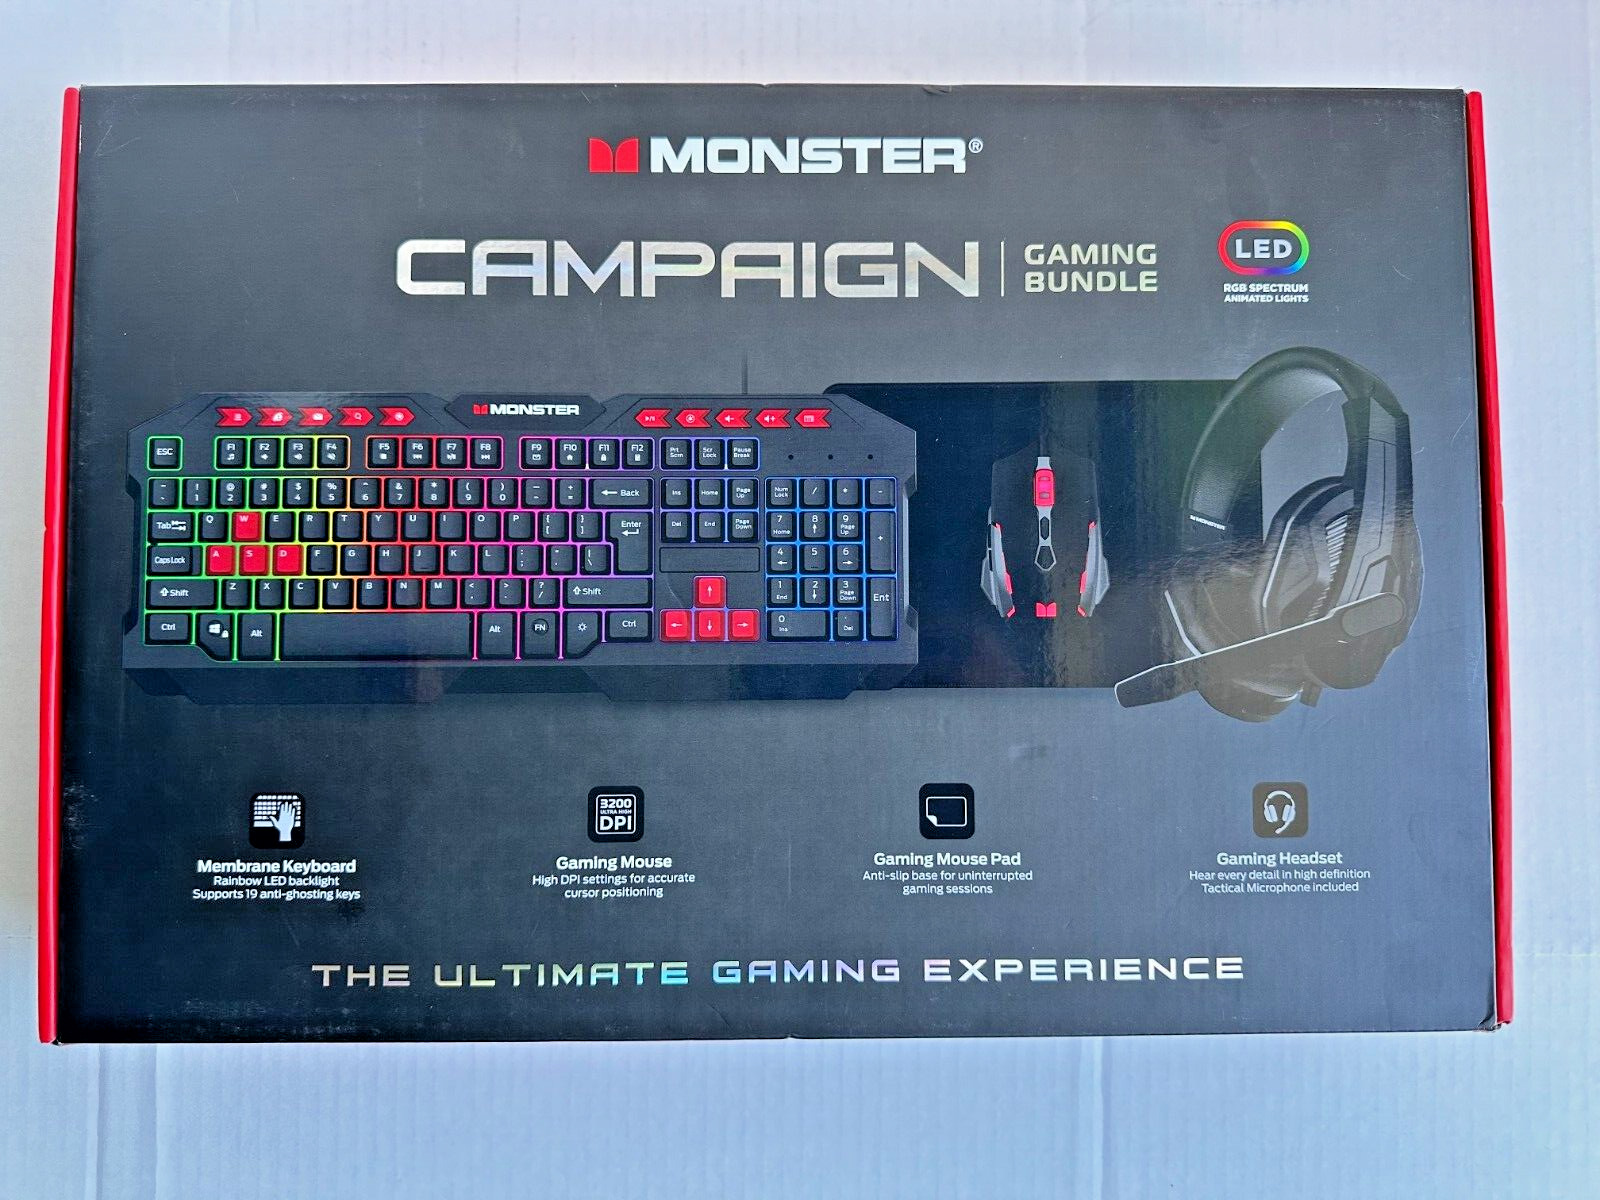 Monster 4-in-1 Gaming Keyboard, Headset, Mouse & Mouse Pad Campaign Bundle. NEW